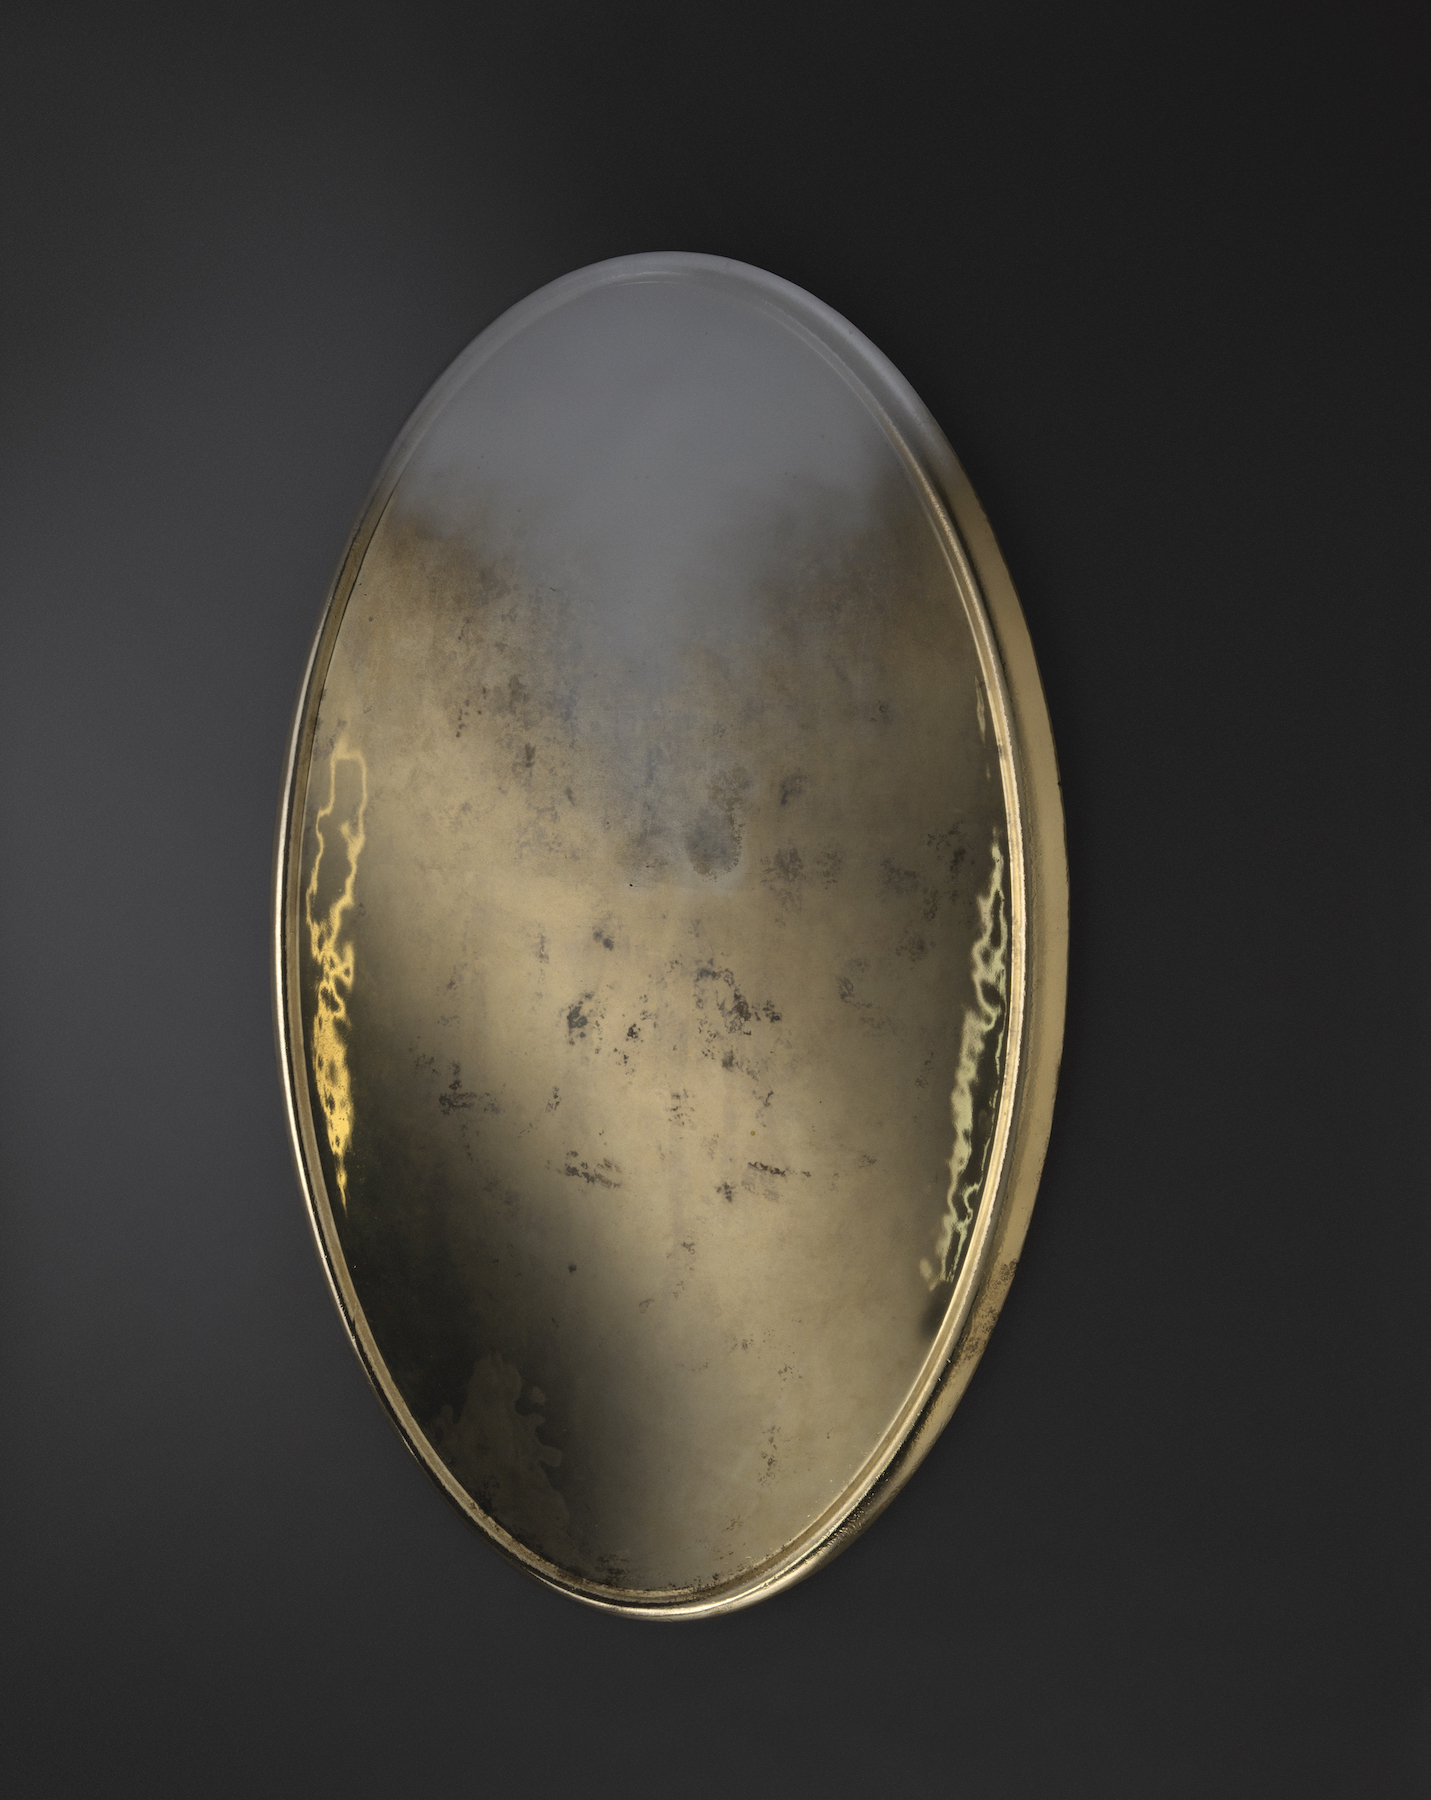 Mia Jung Cloud Mirror, from the Charles Burnand Gallery